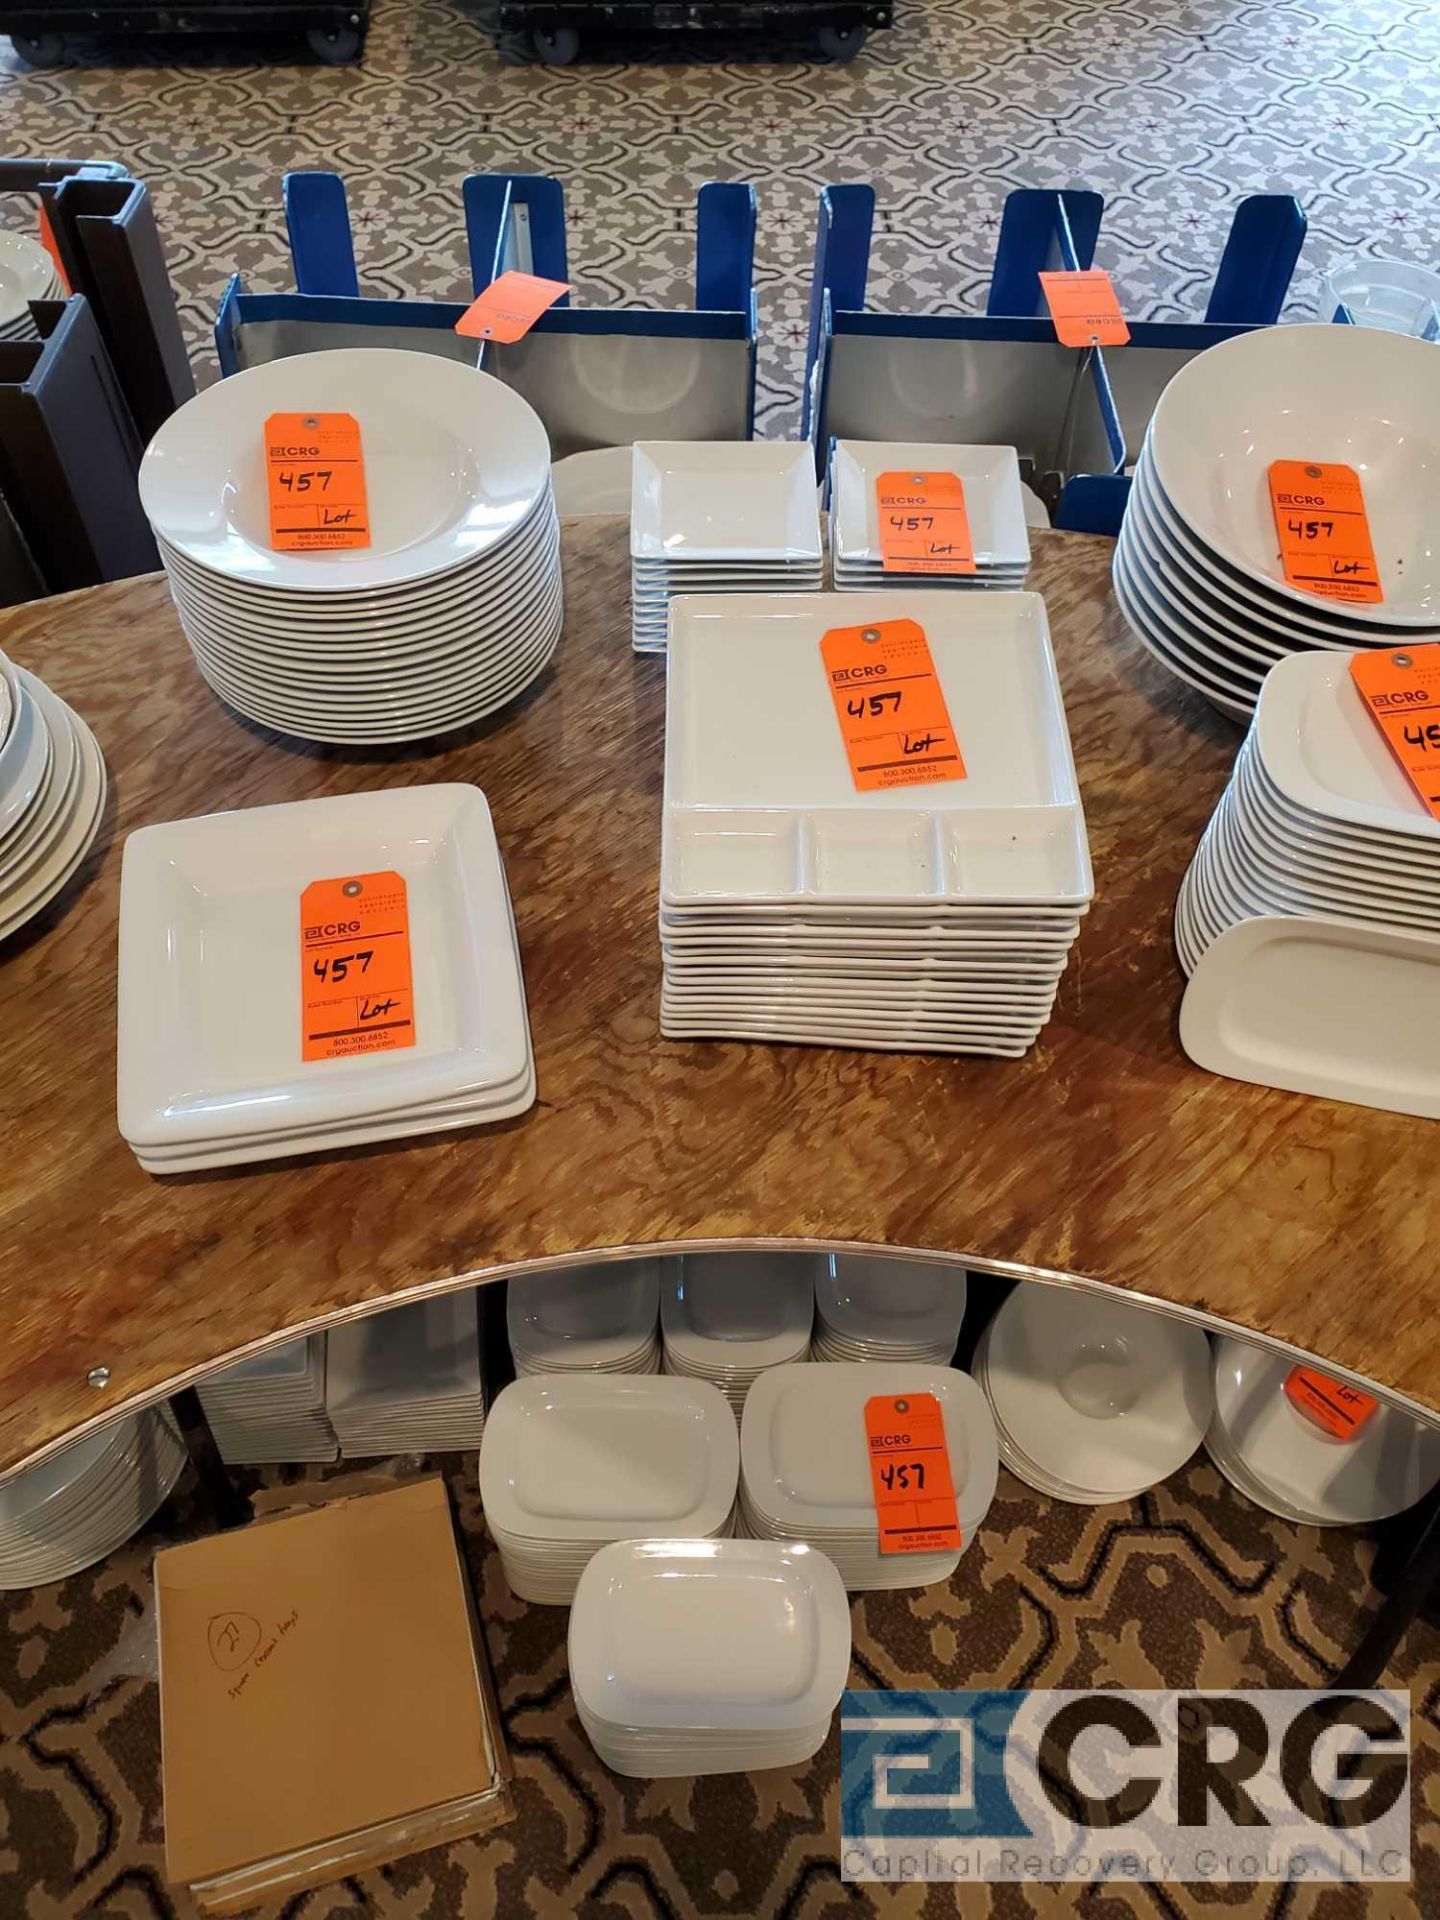 Lot of (509) salad bowls, bowls, ceramic trays, white square plates, and rectangular plates, - Image 3 of 5